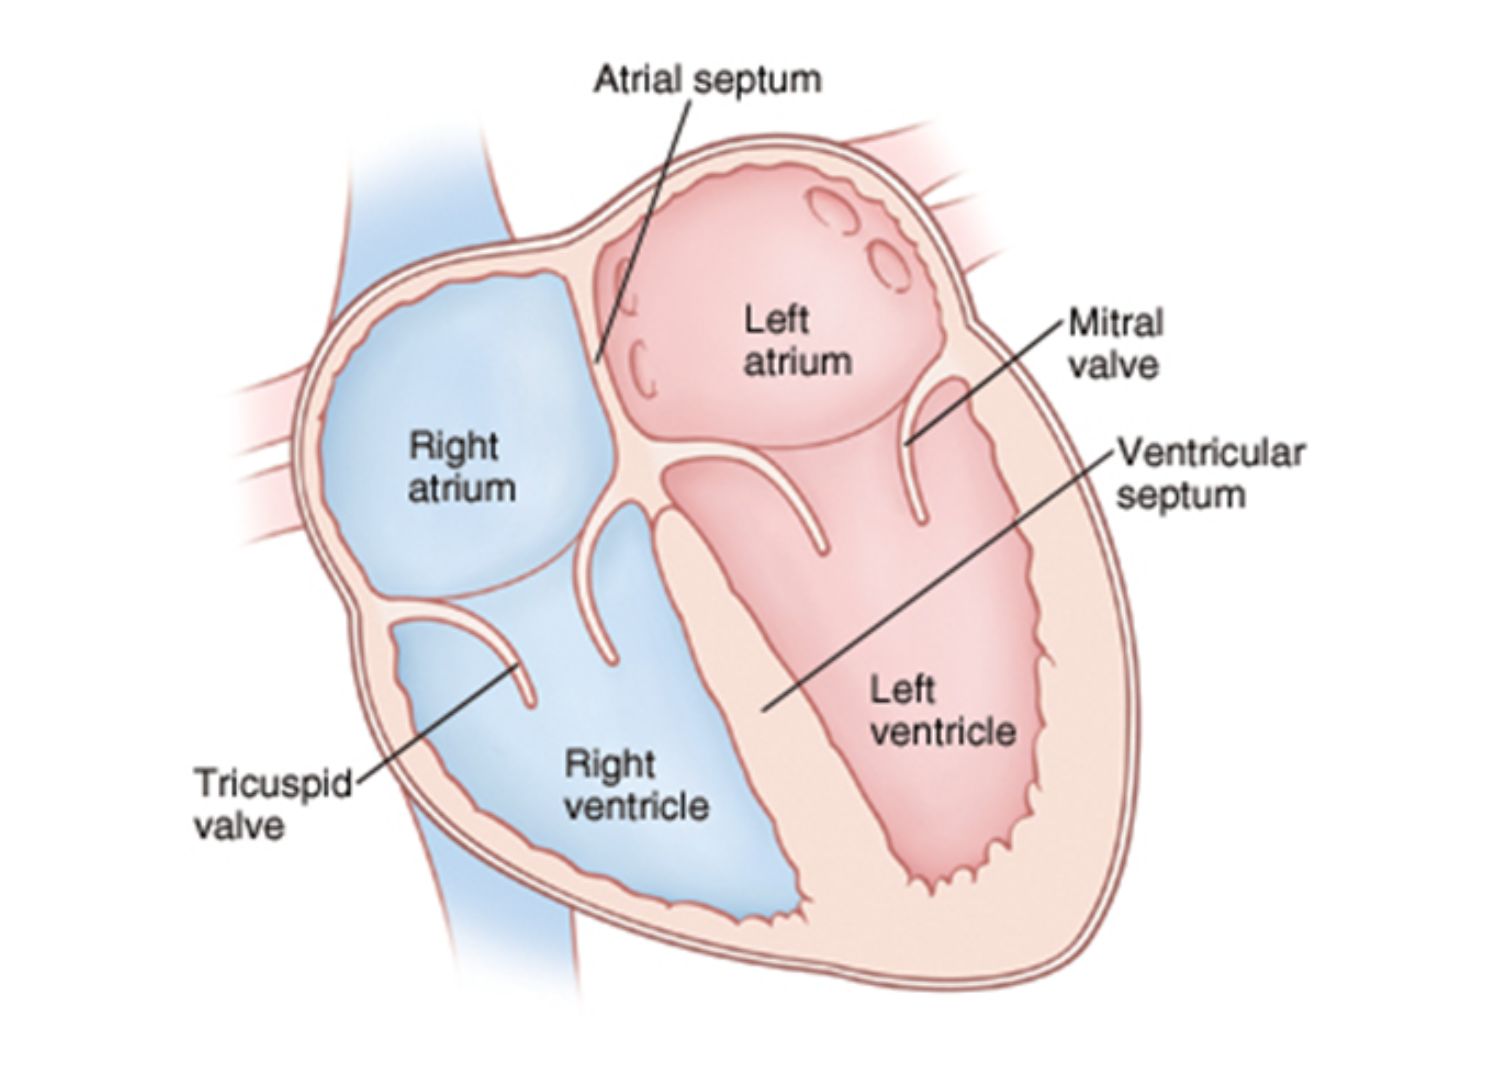 Septal defects: A hole in the heart